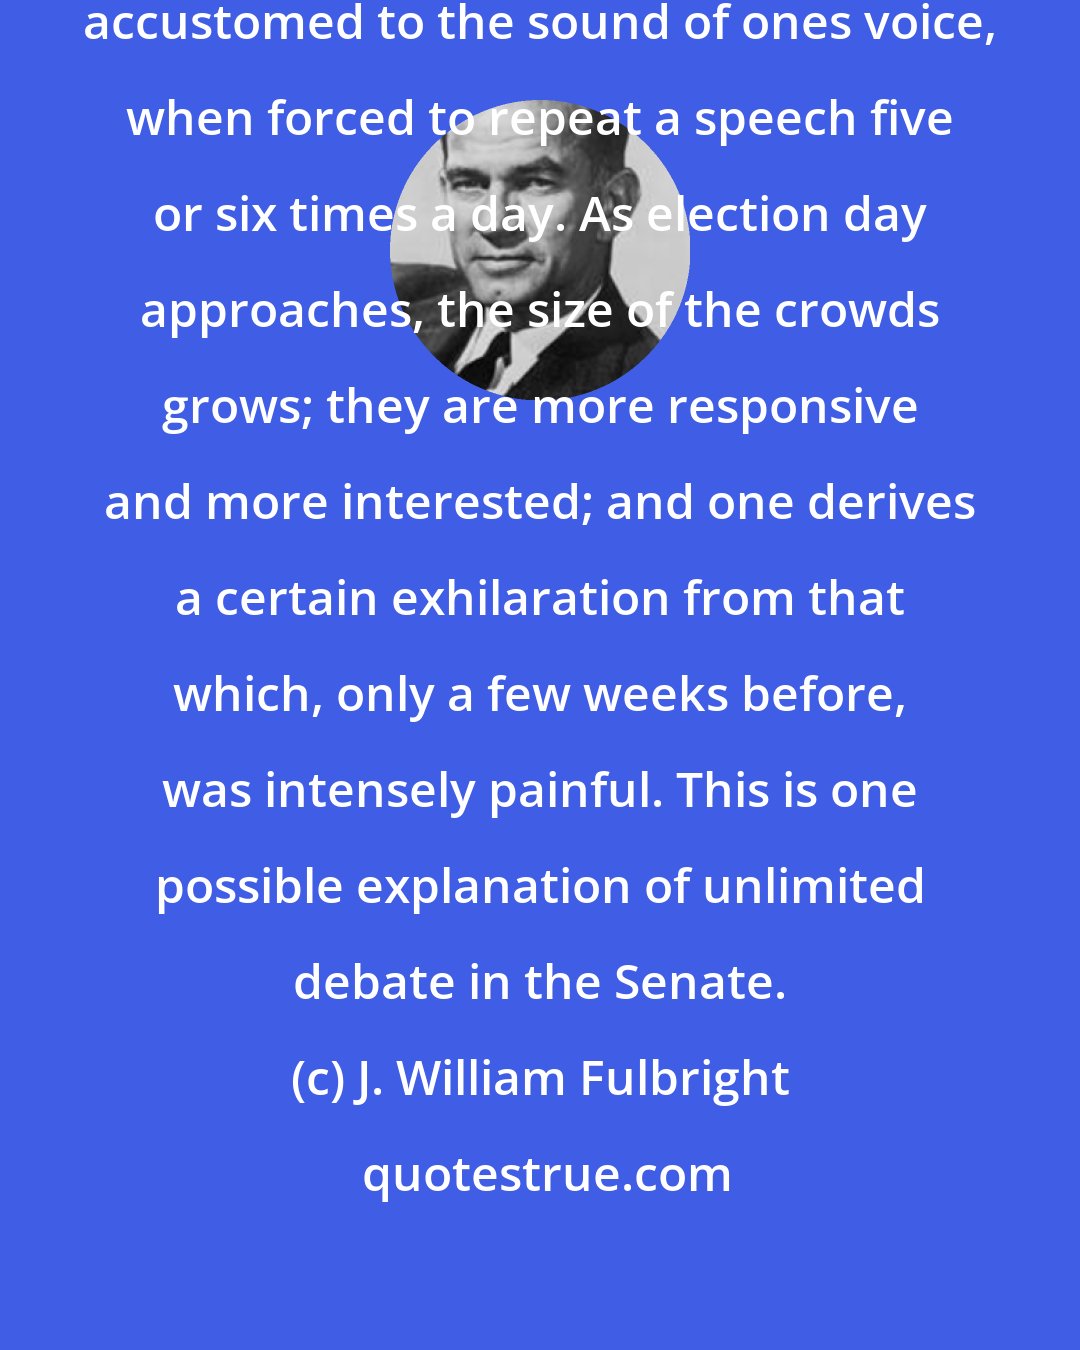 J. William Fulbright: It is amazing how soon one becomes accustomed to the sound of ones voice, when forced to repeat a speech five or six times a day. As election day approaches, the size of the crowds grows; they are more responsive and more interested; and one derives a certain exhilaration from that which, only a few weeks before, was intensely painful. This is one possible explanation of unlimited debate in the Senate.